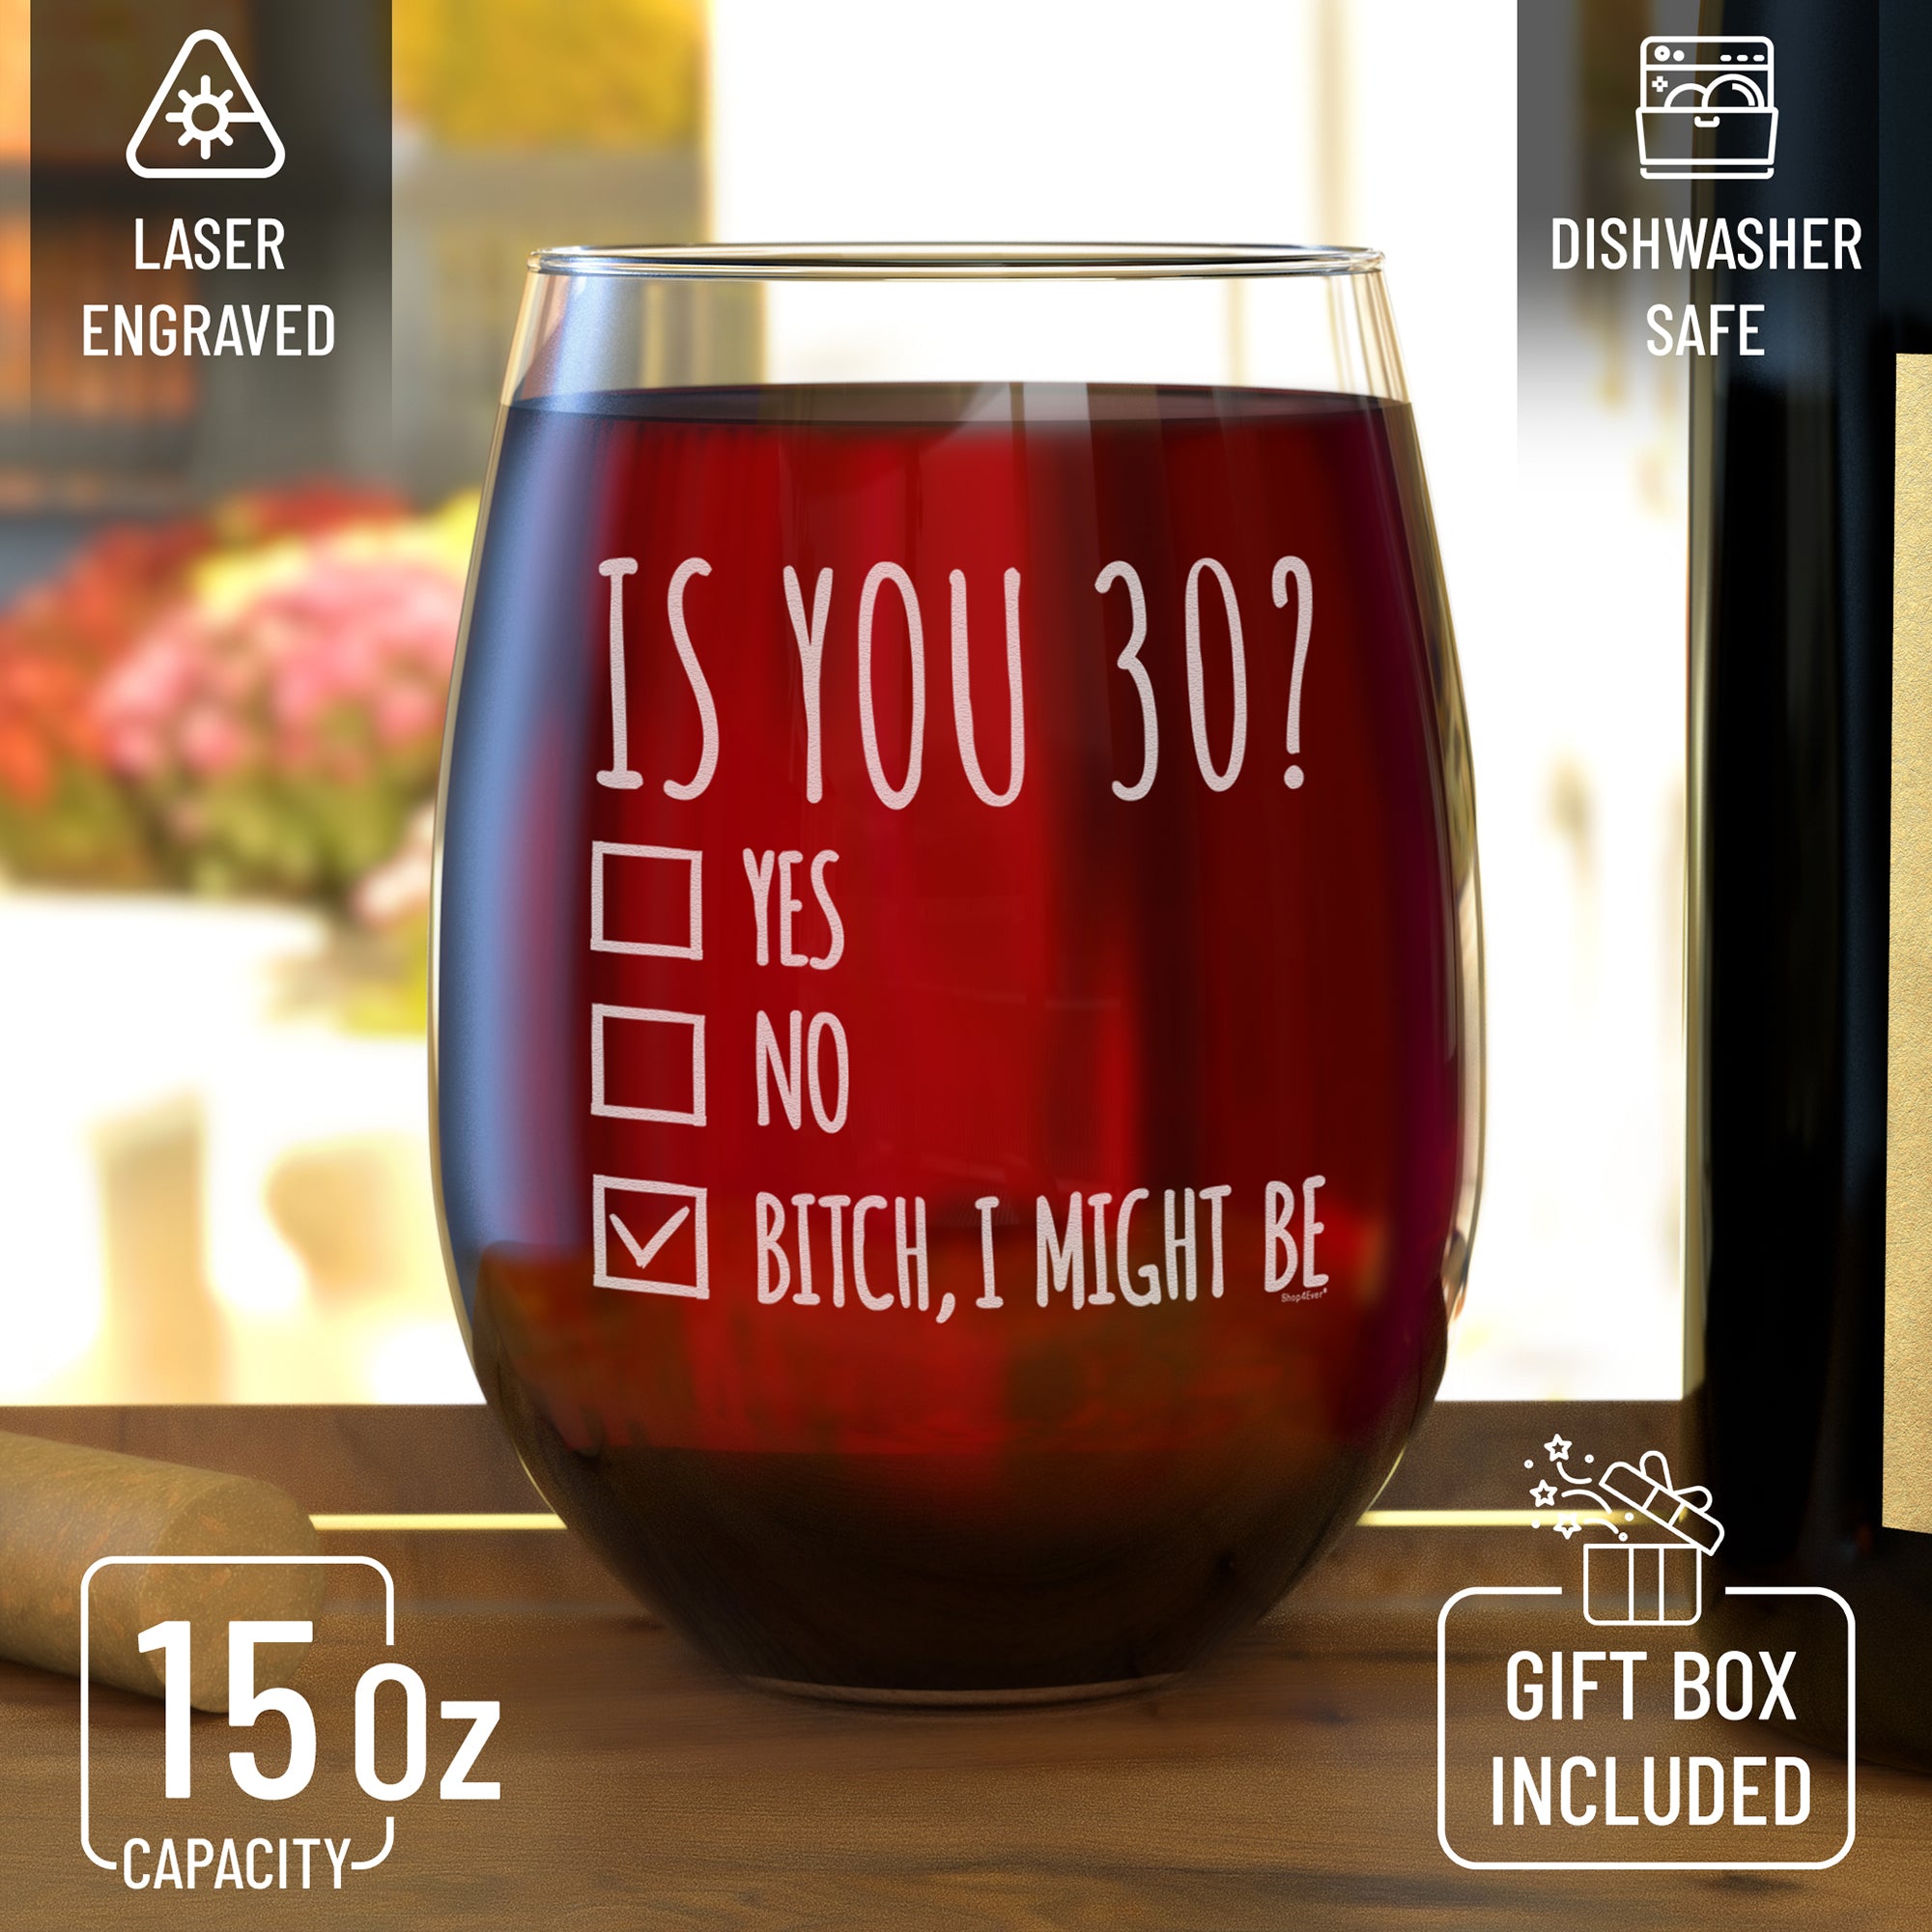 30th Birthday Wine Glass Gift for Women Is You 30? Yes No Engraved Stemless Wine Glass